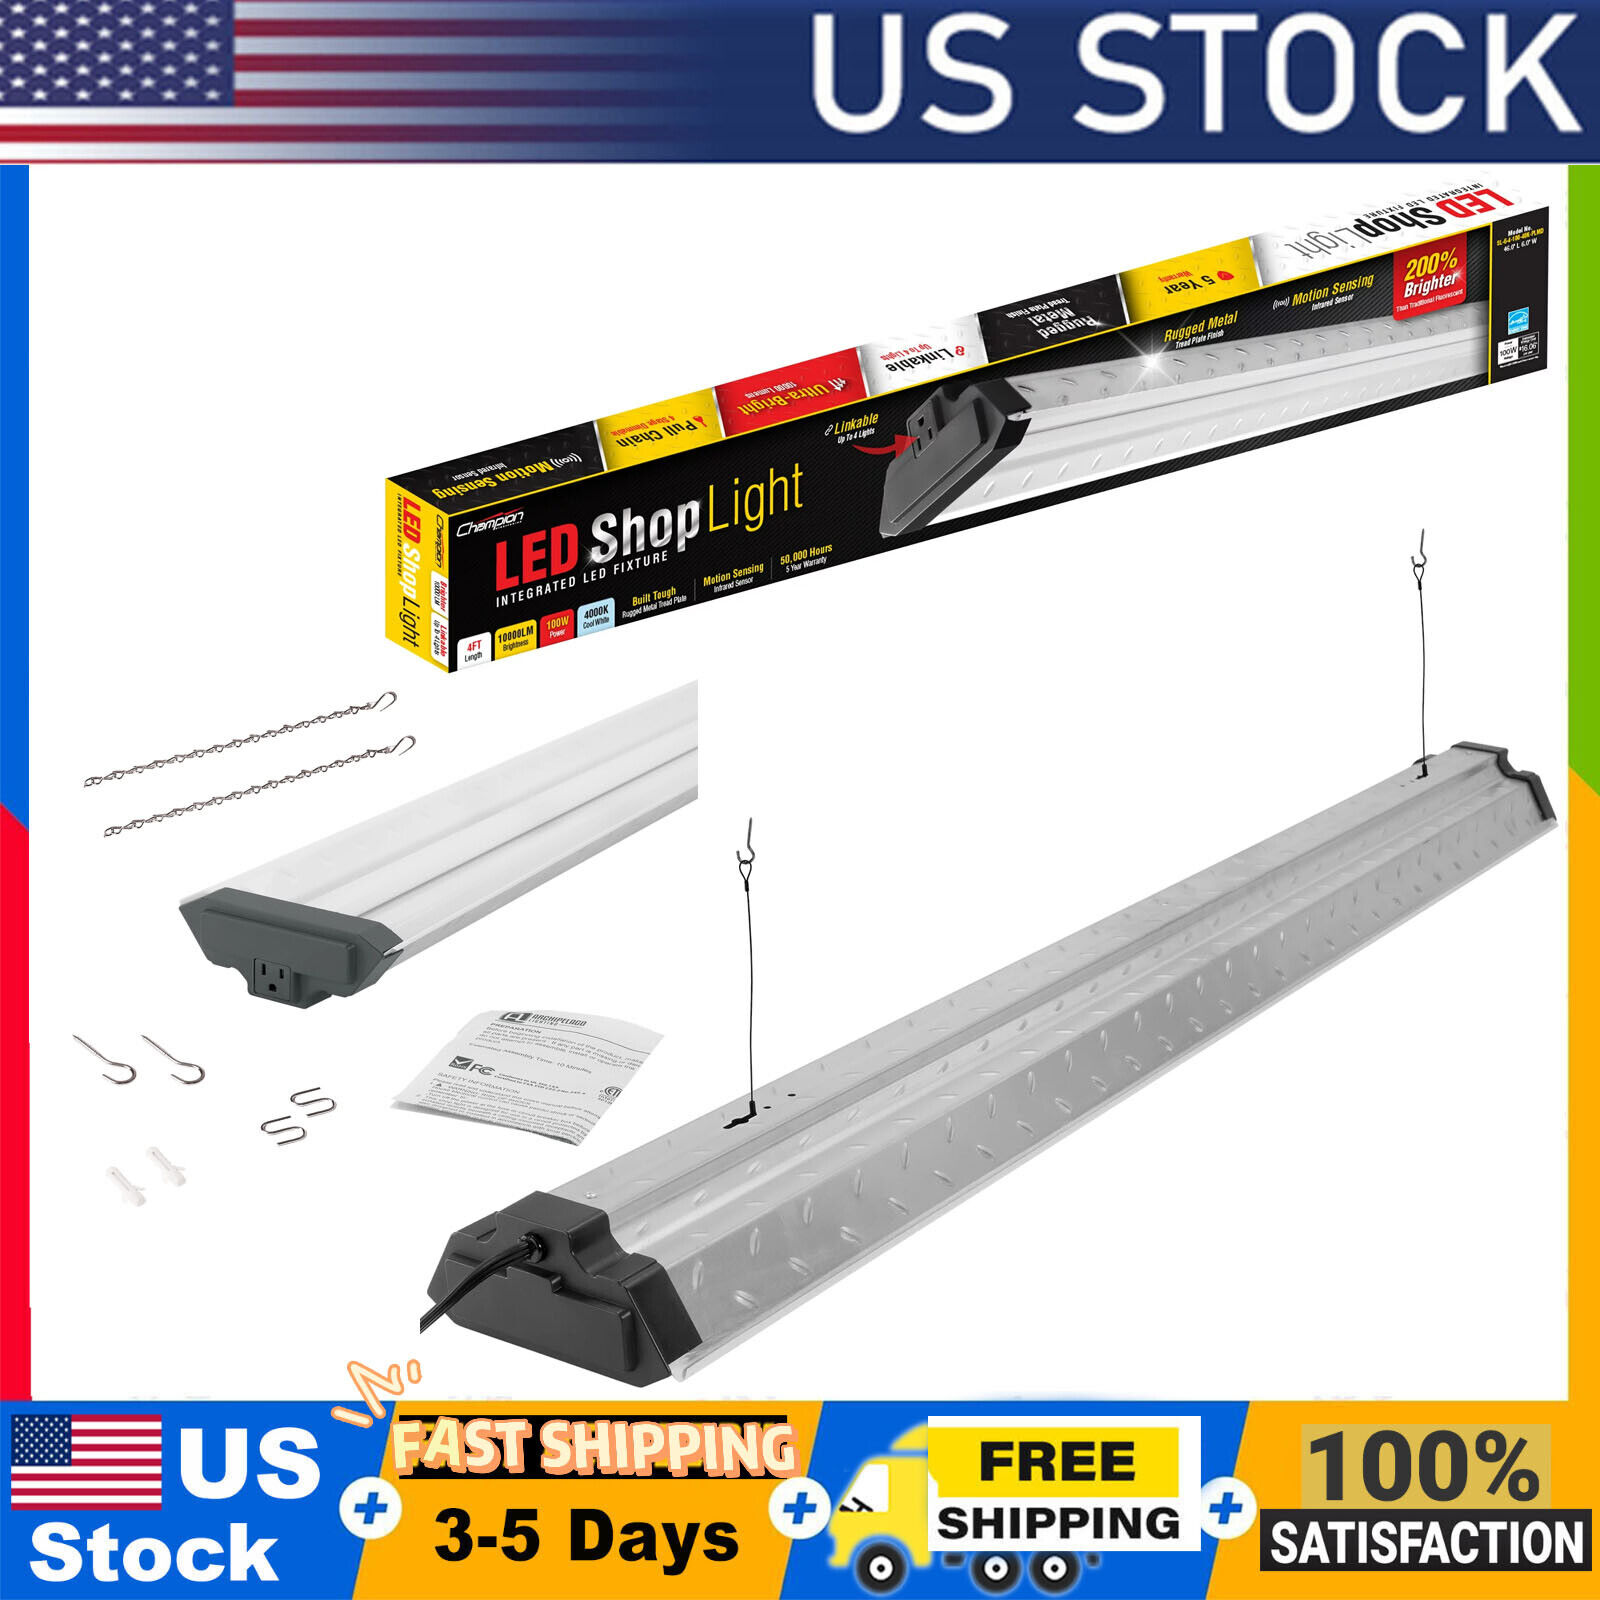 4ft LED Shop Light 10,000 Lumen with Motion,Steel Tread Plate,Dimmable,3.4 lbs.